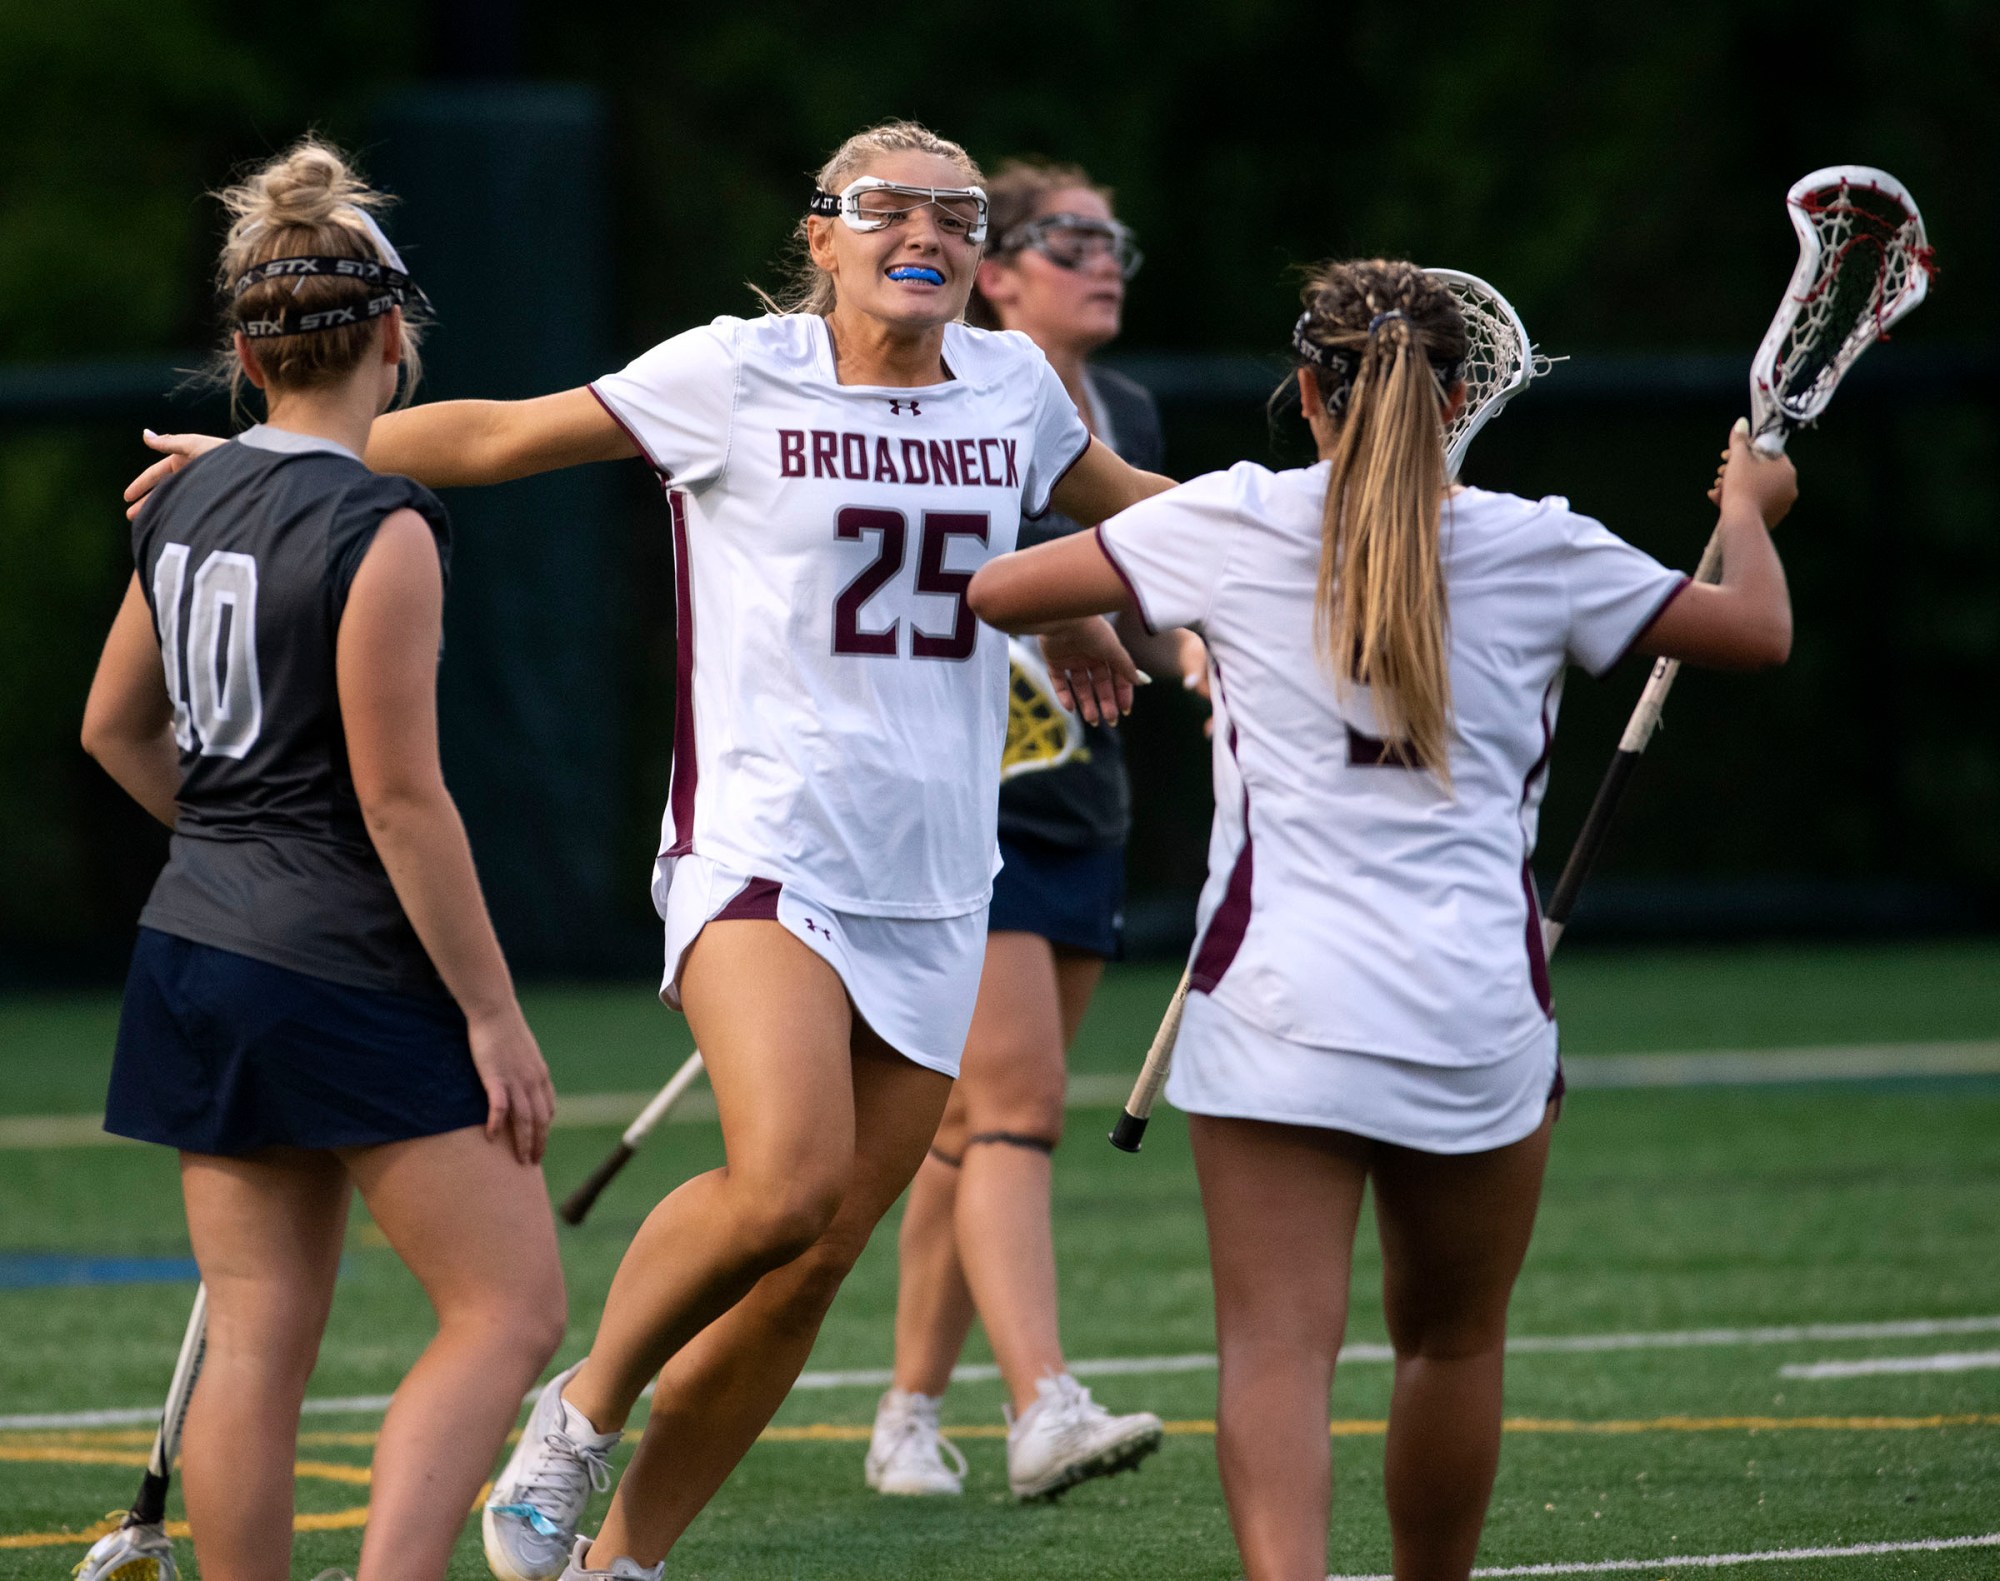 Broadneck's Olivia Orso, center, reacts with Ceci Facciponti, right, after scoring against Urbana in the Class 4A girls state lacrosse championship at Stevenson University in Owings Mills. Broadneck won 10-9.(John Gillis/Freelance)